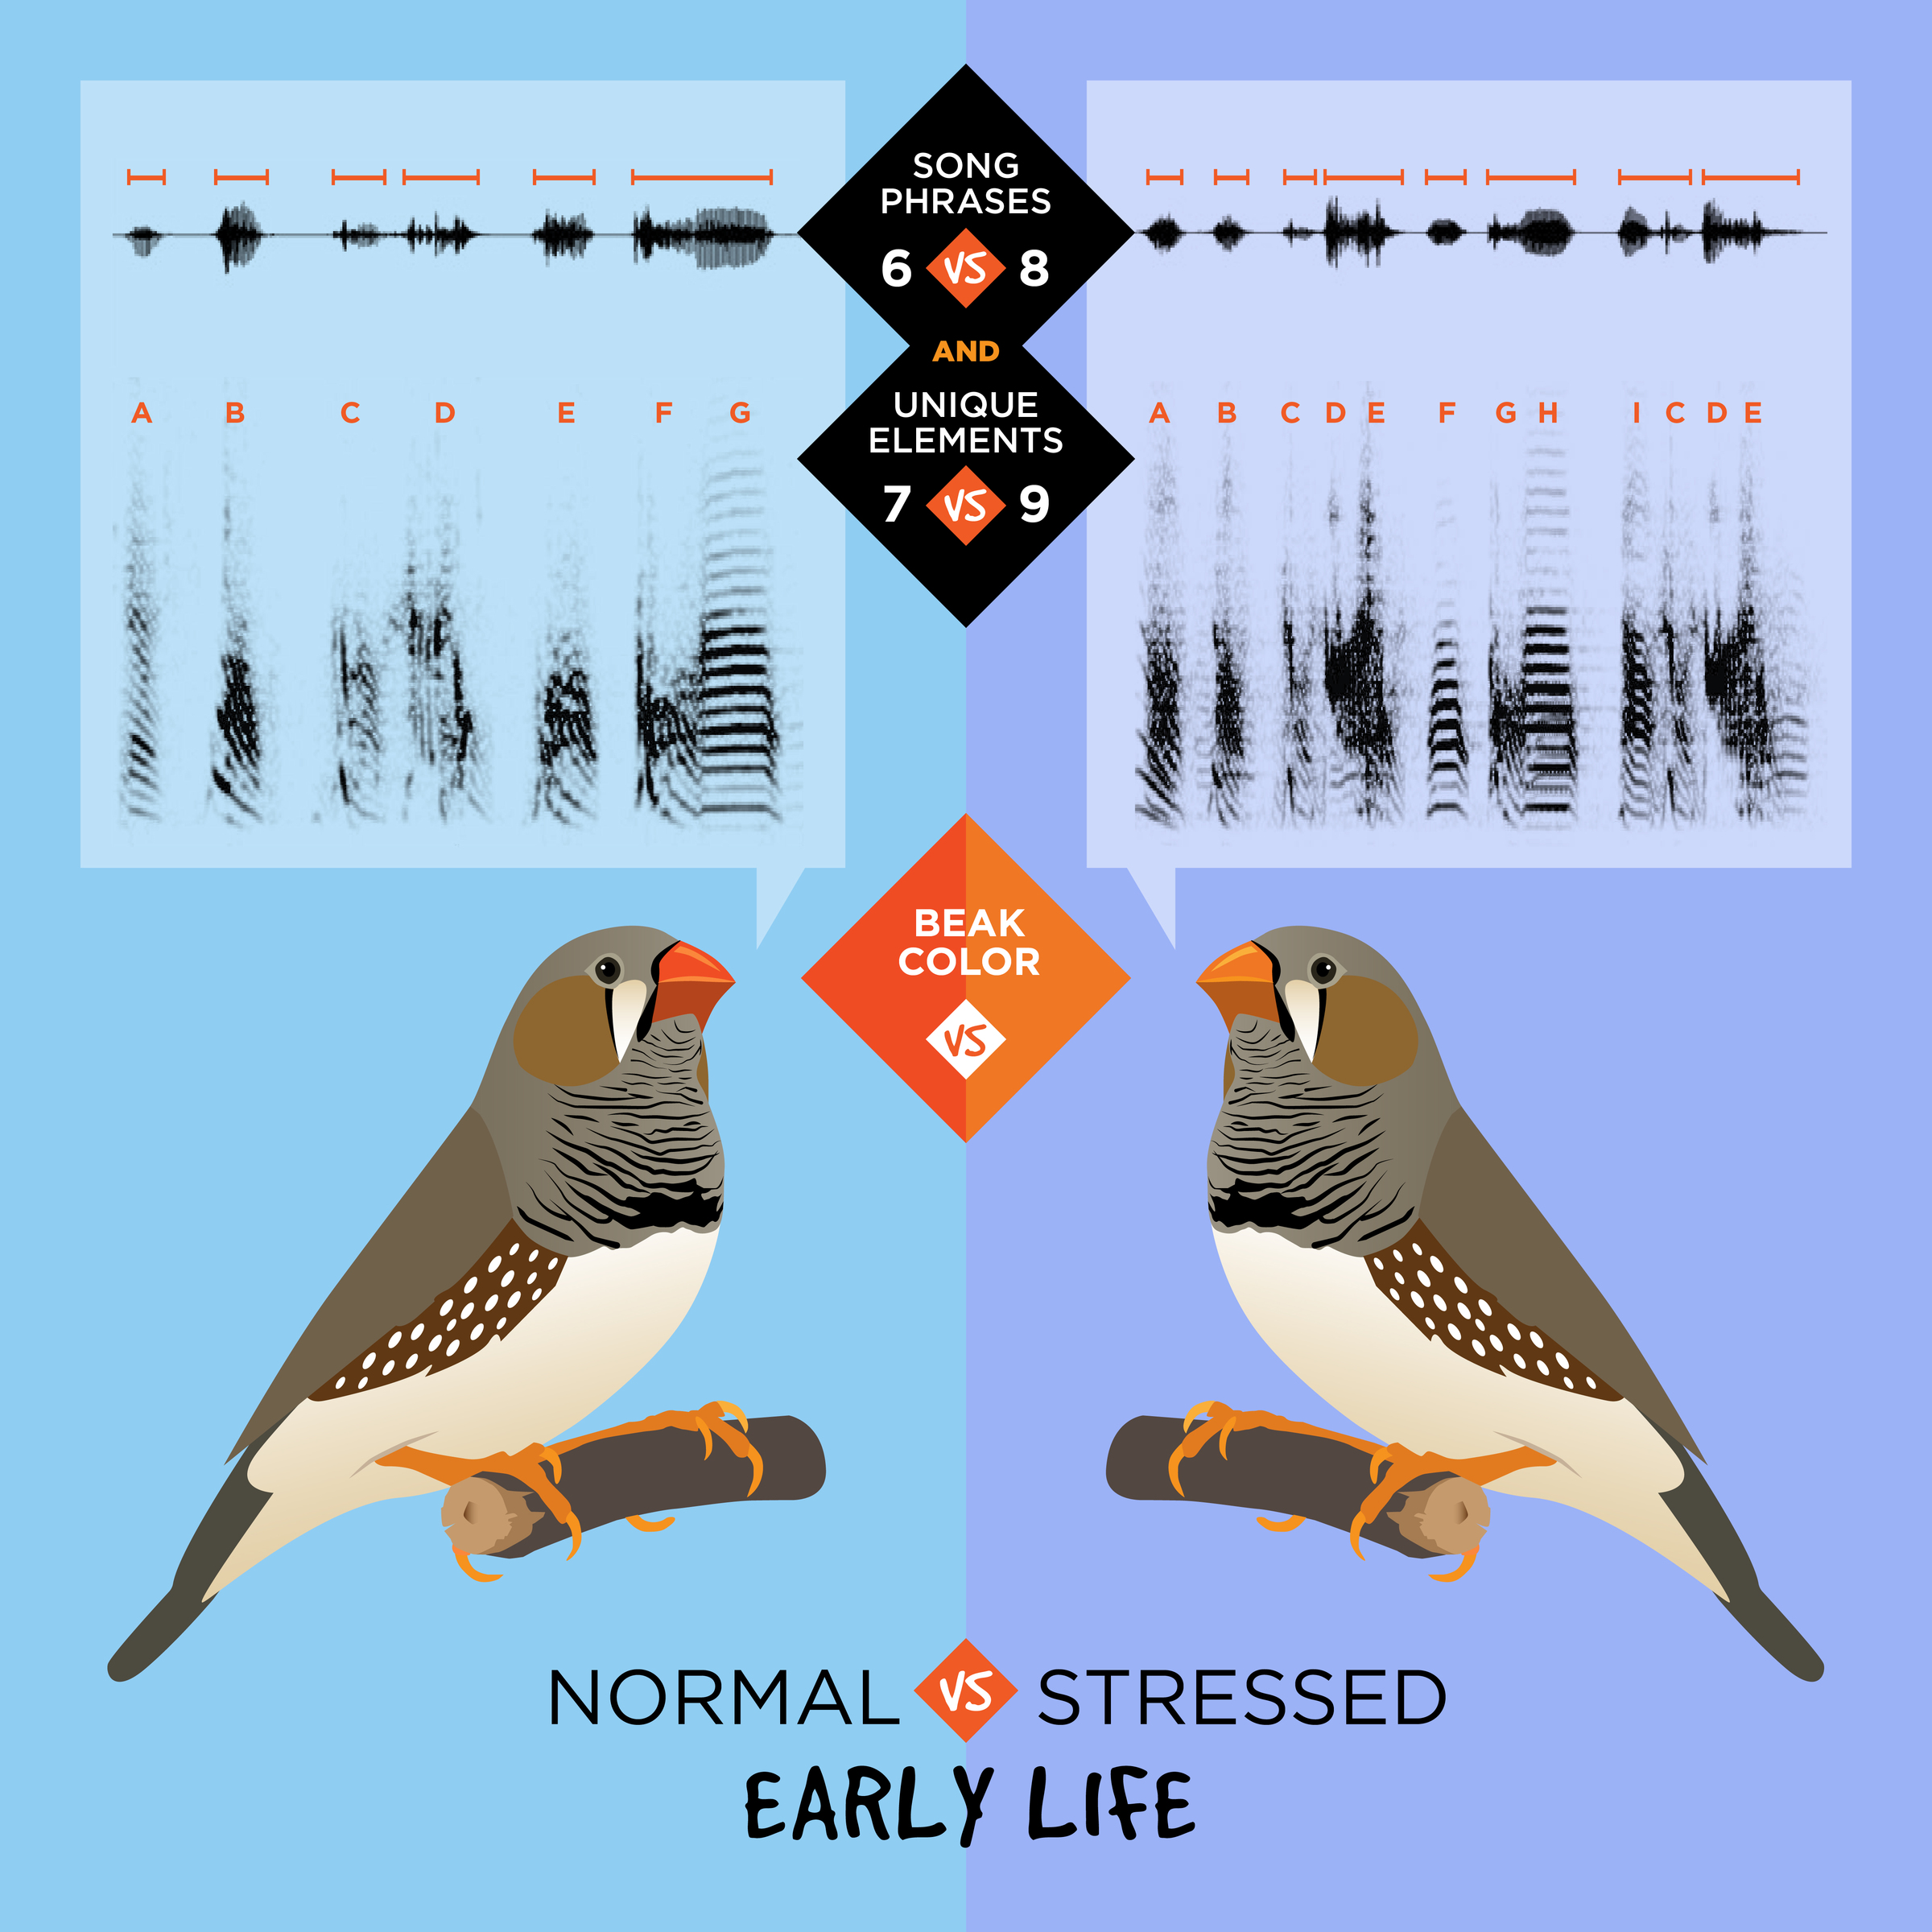 Zebra Finch Study Finds Mixed Impact Of Early Life Stress Illinois,Simplicity Rag Quilt Patterns